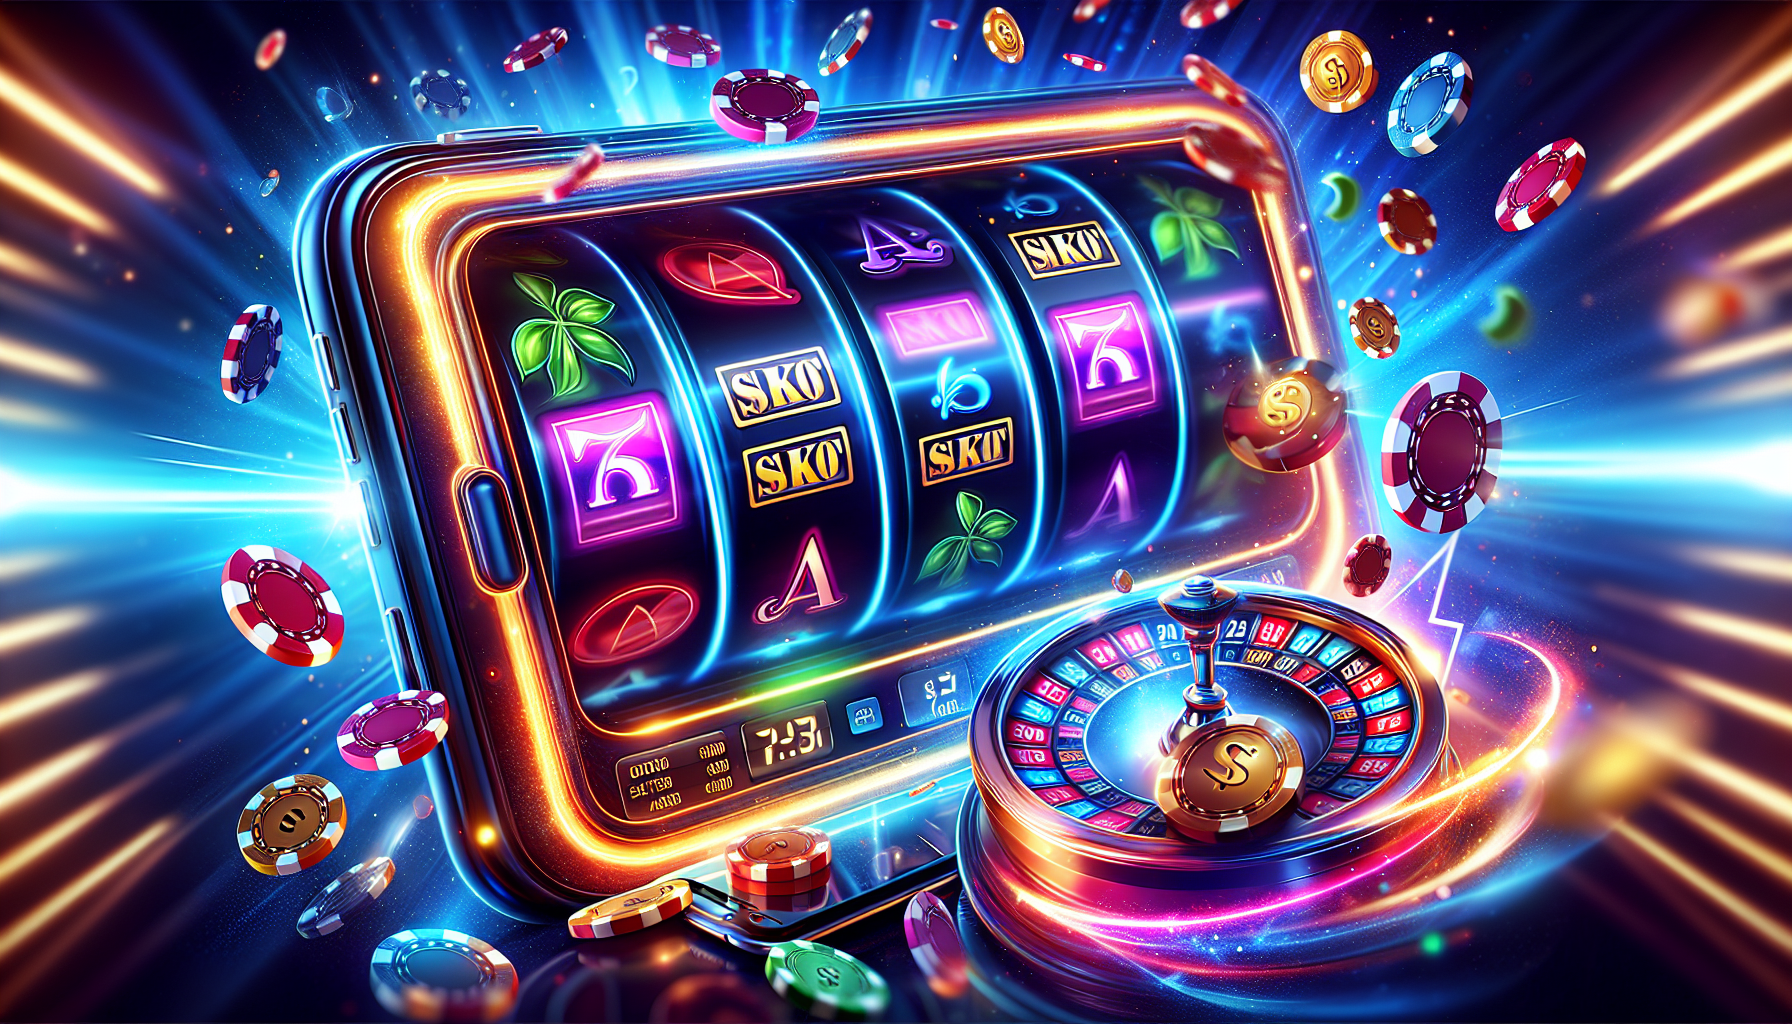 Can You Earn Real Money From Slot Apps?